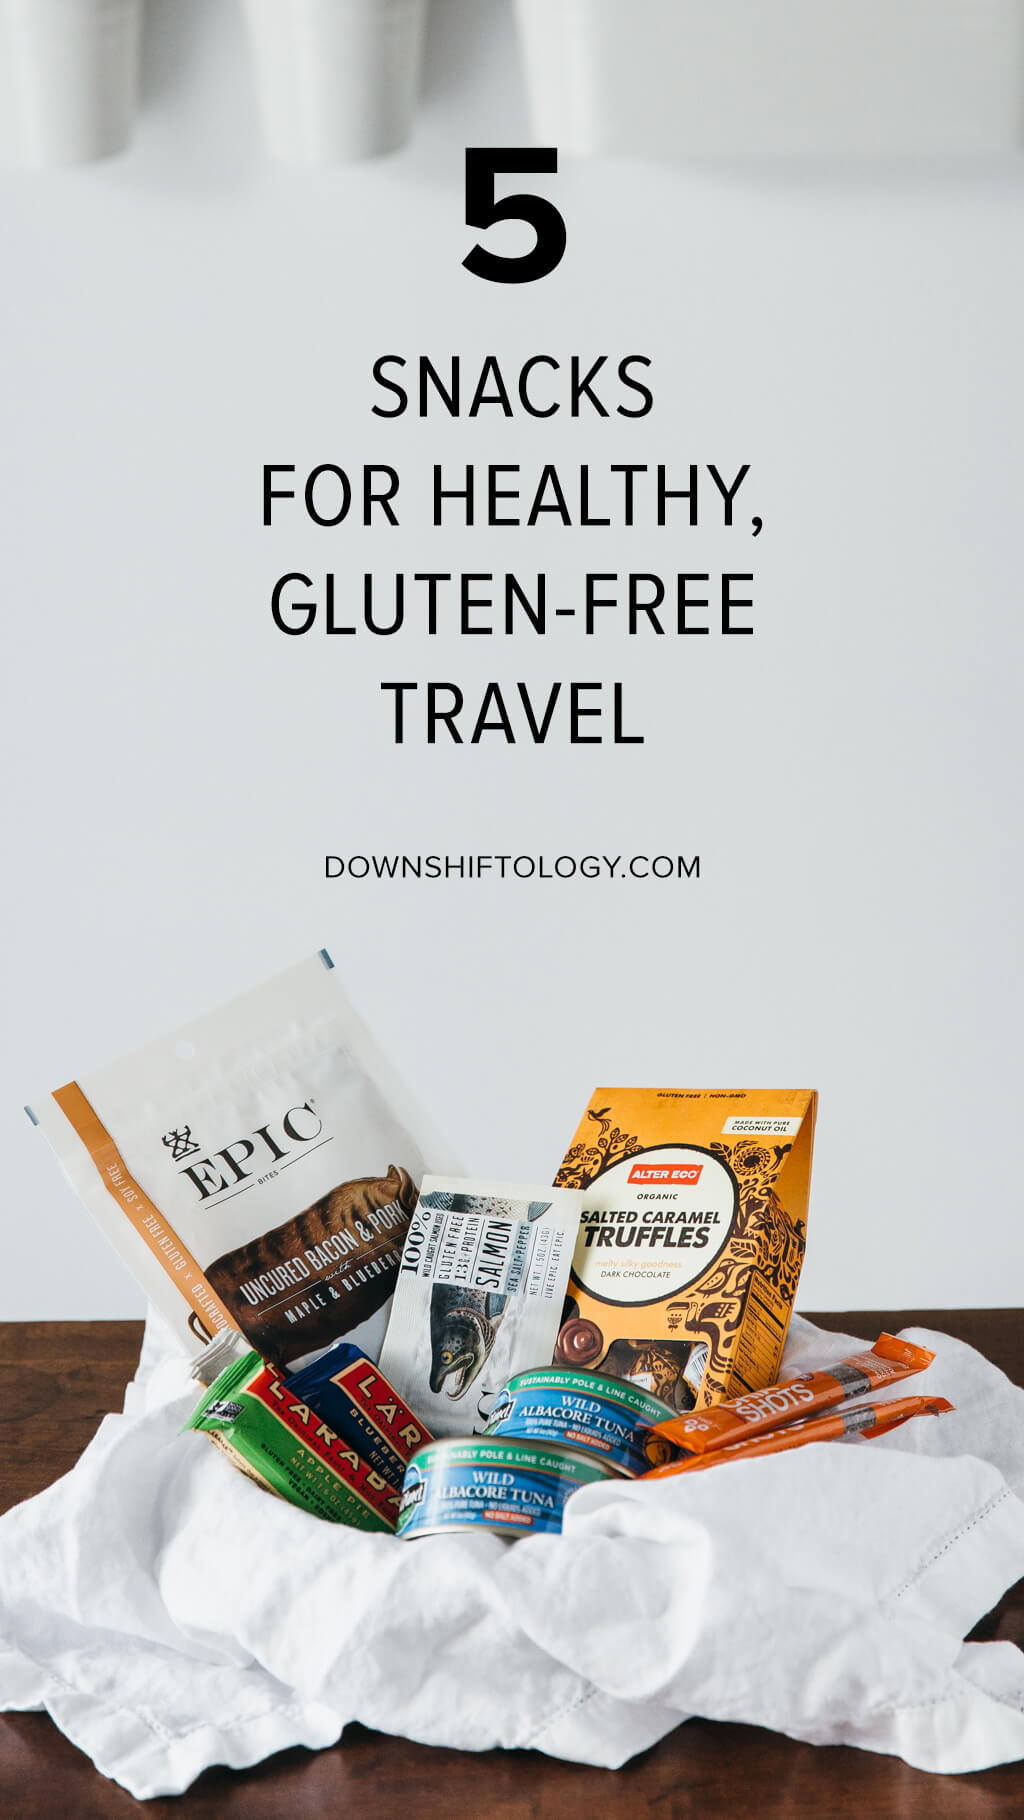 5 snacks for healthy, gluten-free travel. These items are my "go to" gluten-free travel snacks. | www.downshiftology.com